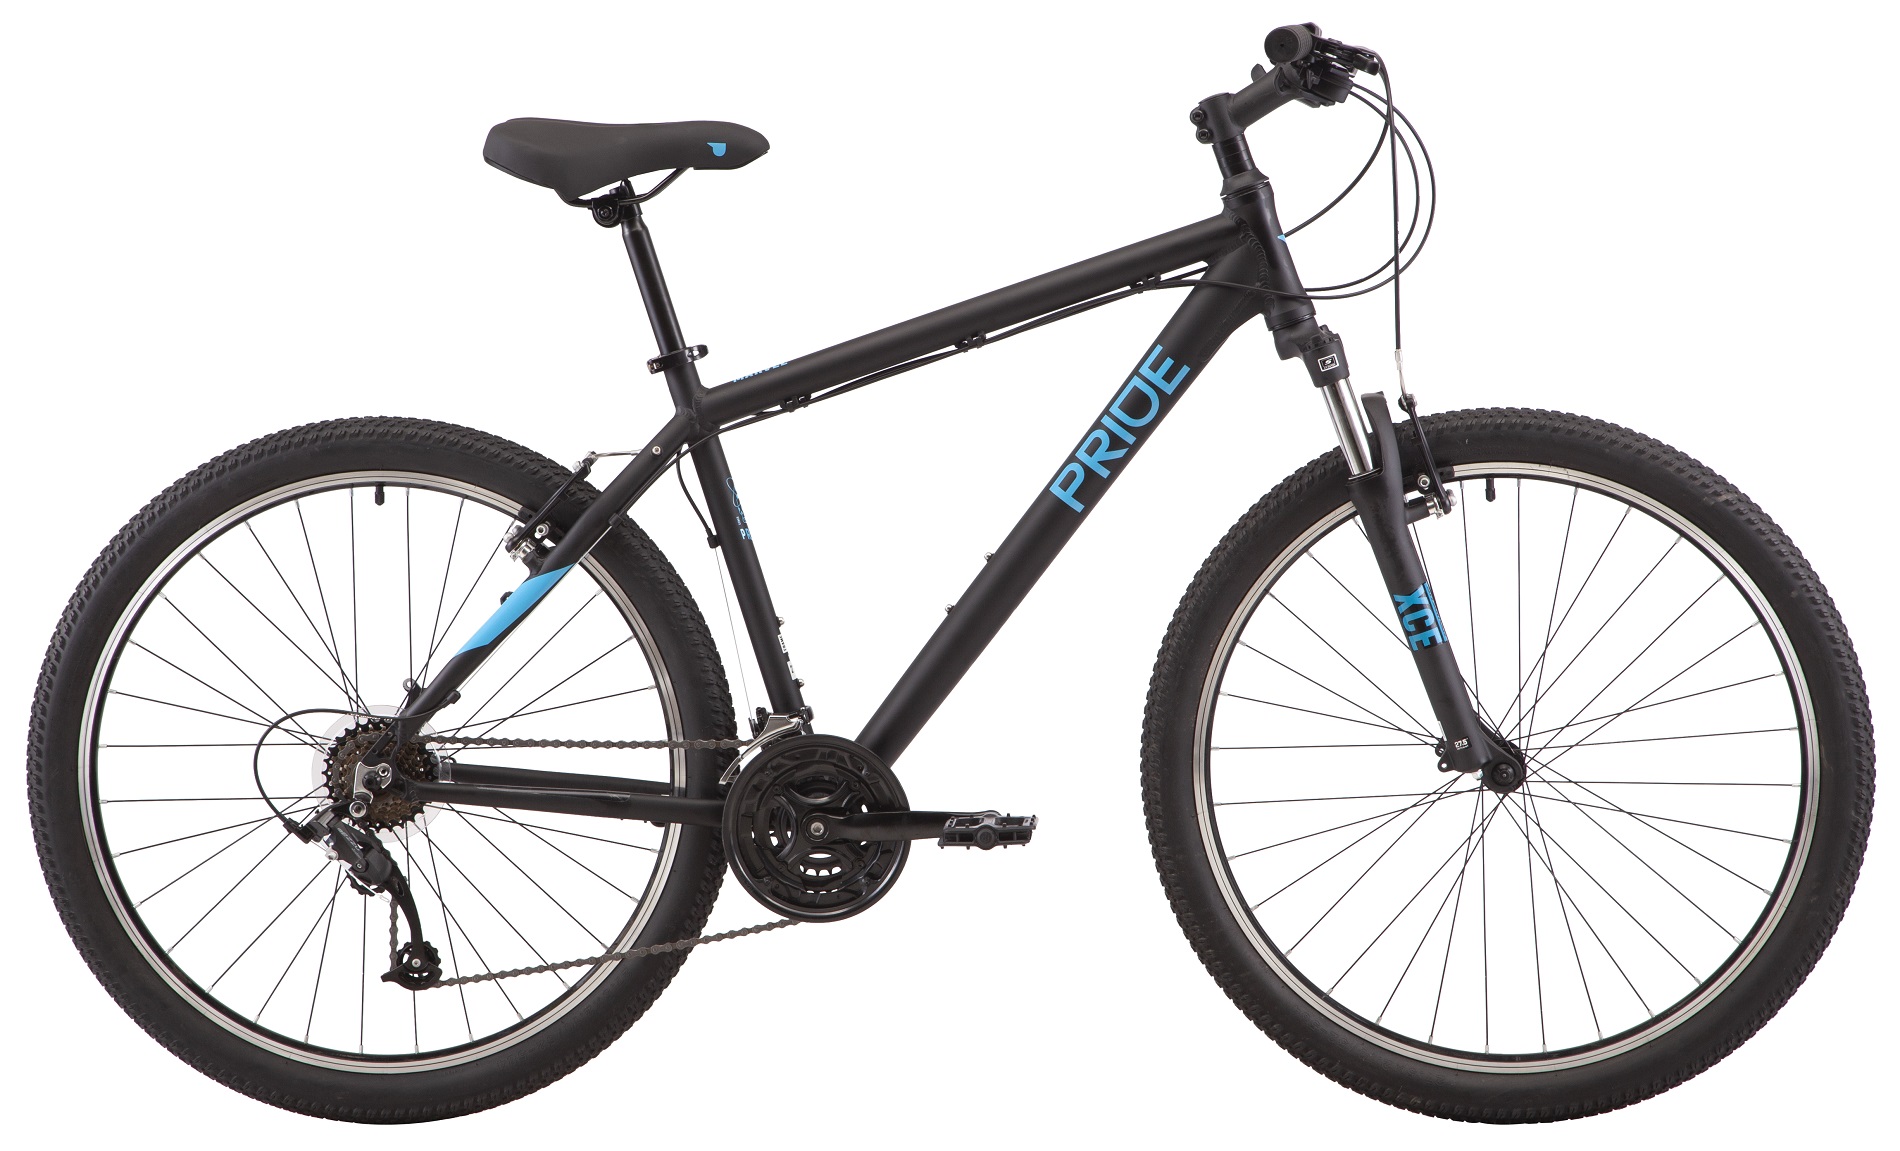 27.5" PRIDE MARVEL 7.1 frame - M 2022 Black (rear and front switches and tamnet - Microshift) Photo